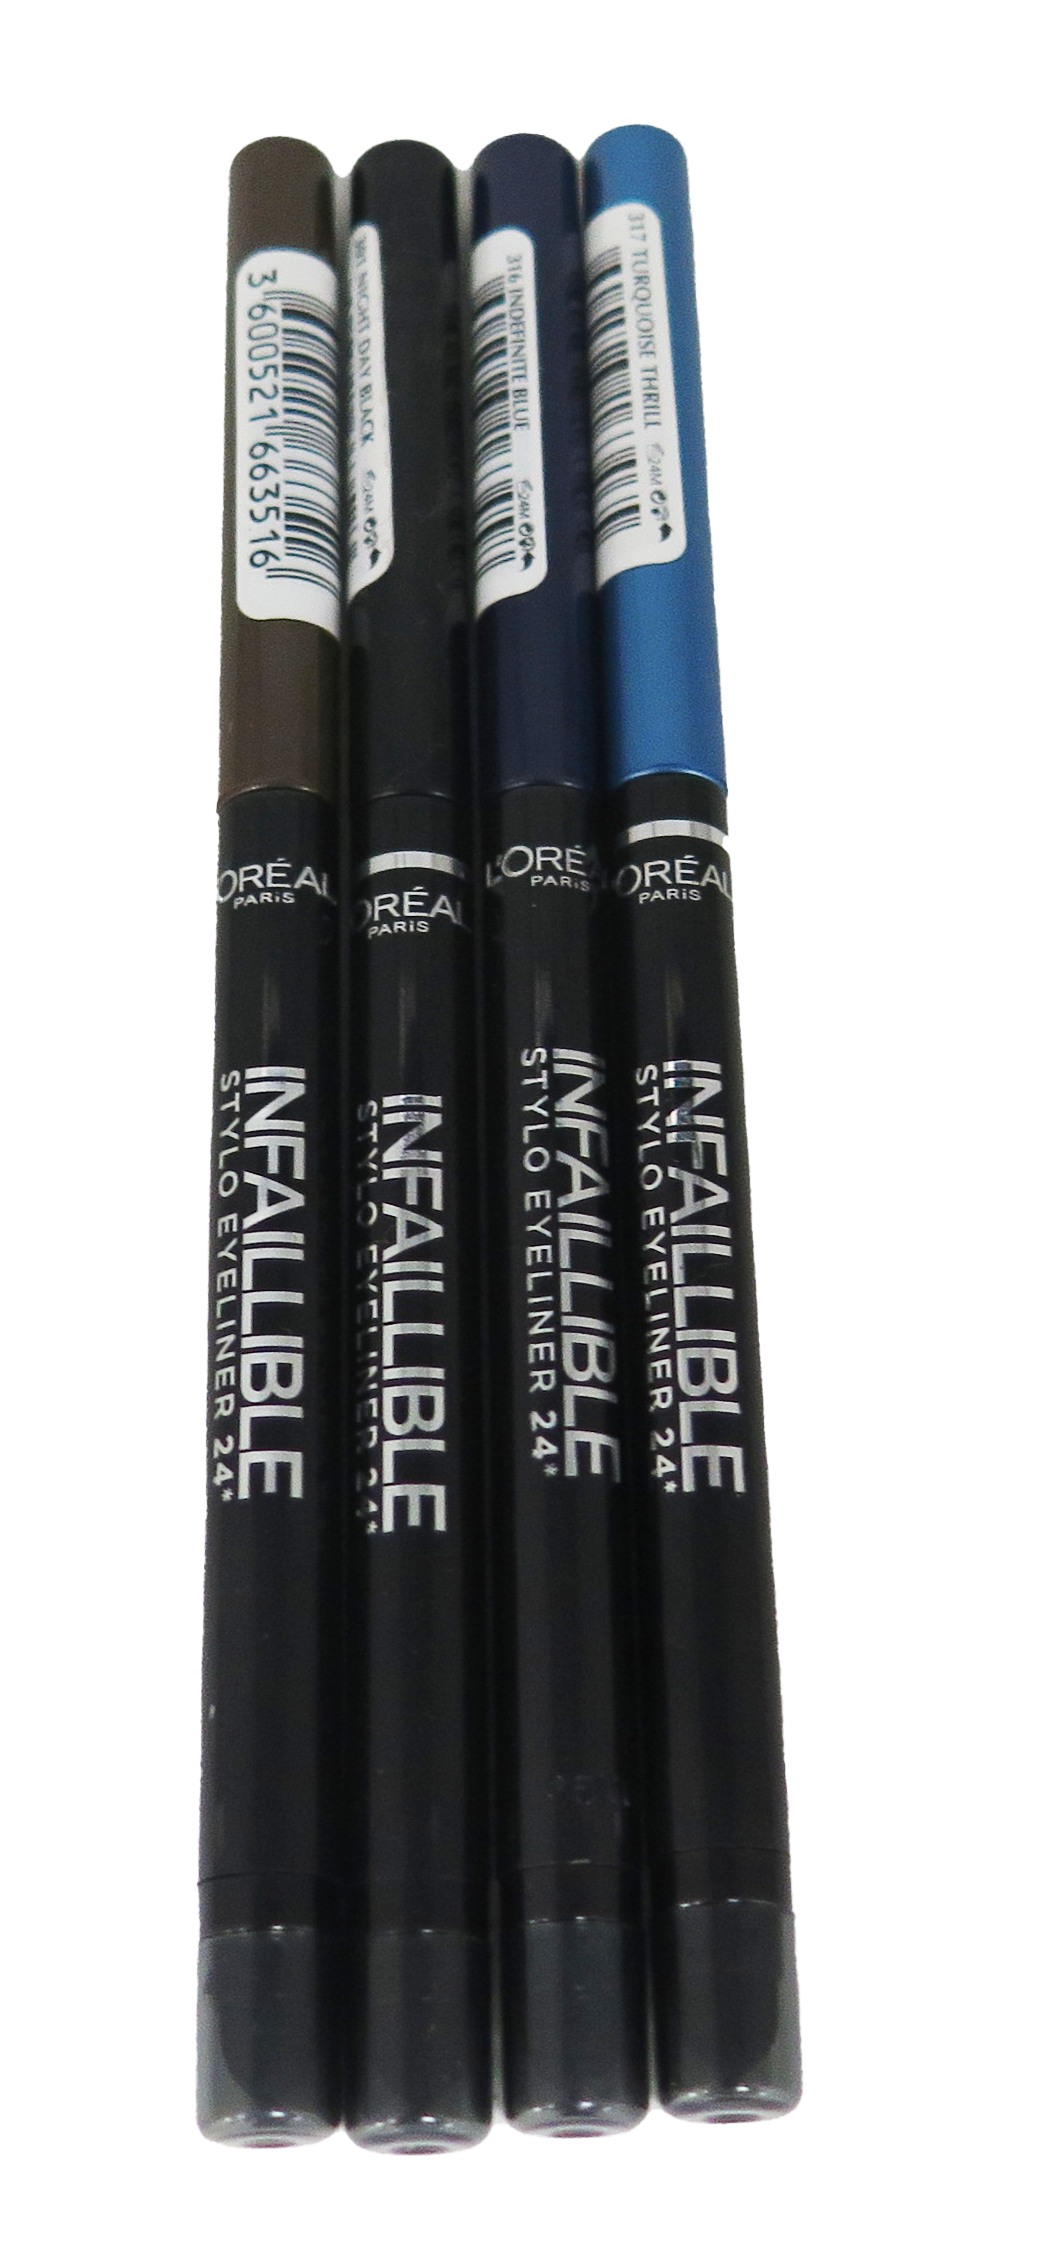 L'Oreal Infaillible Stylo Eyeliner - Assorted